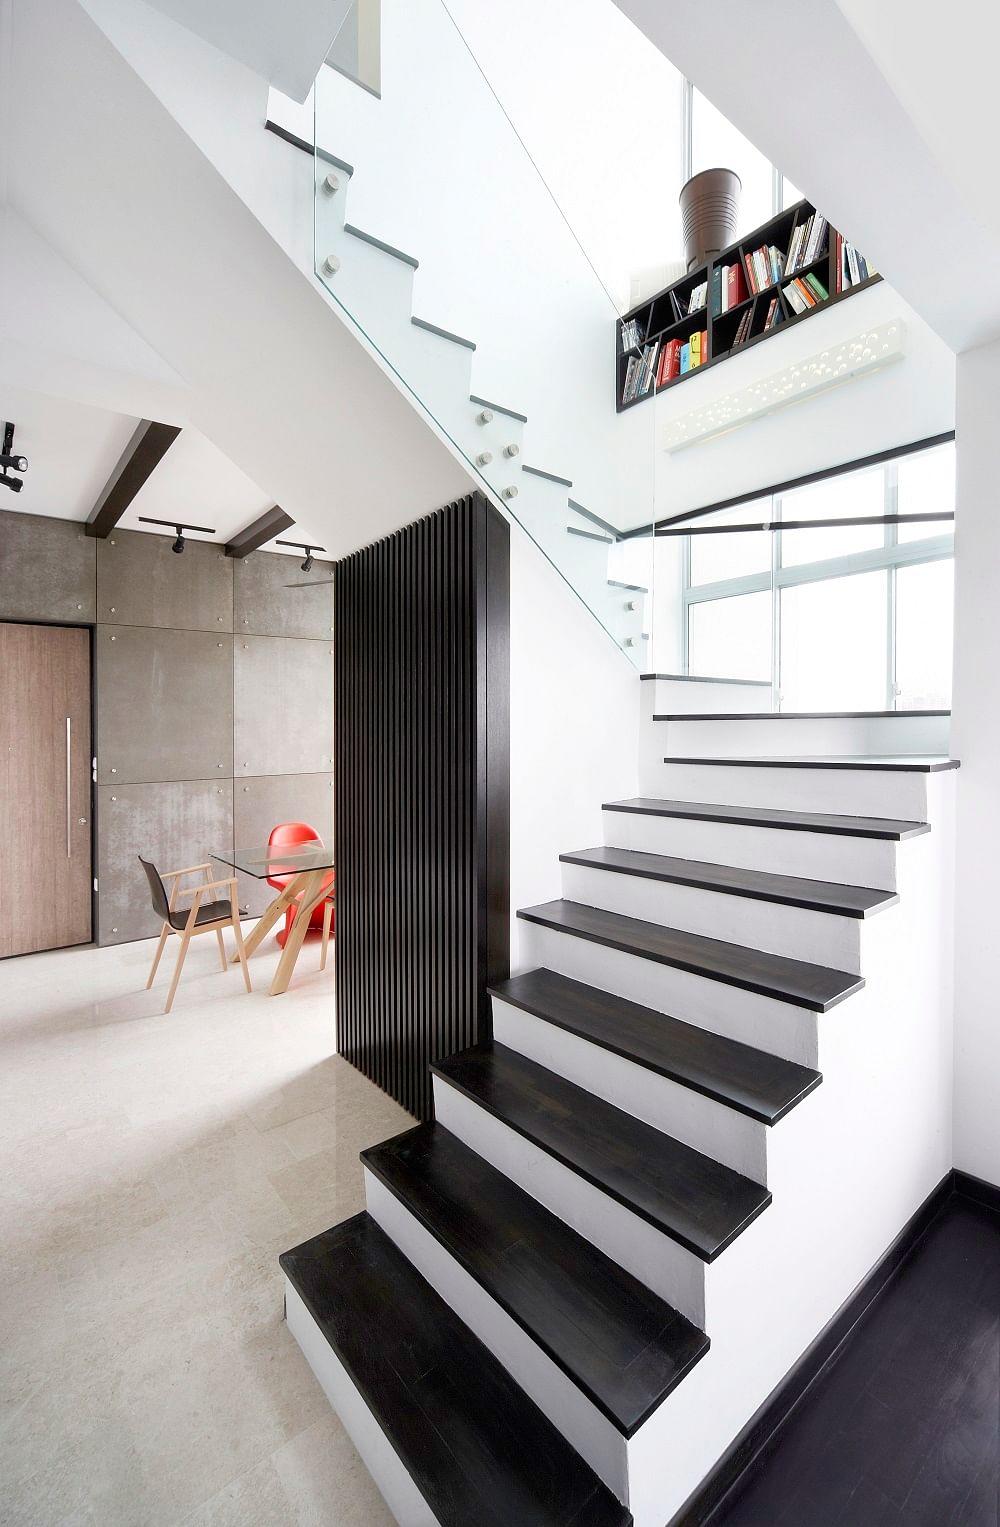 Renovation: 6 staircase design ideas as seen in Singapore homes - Home